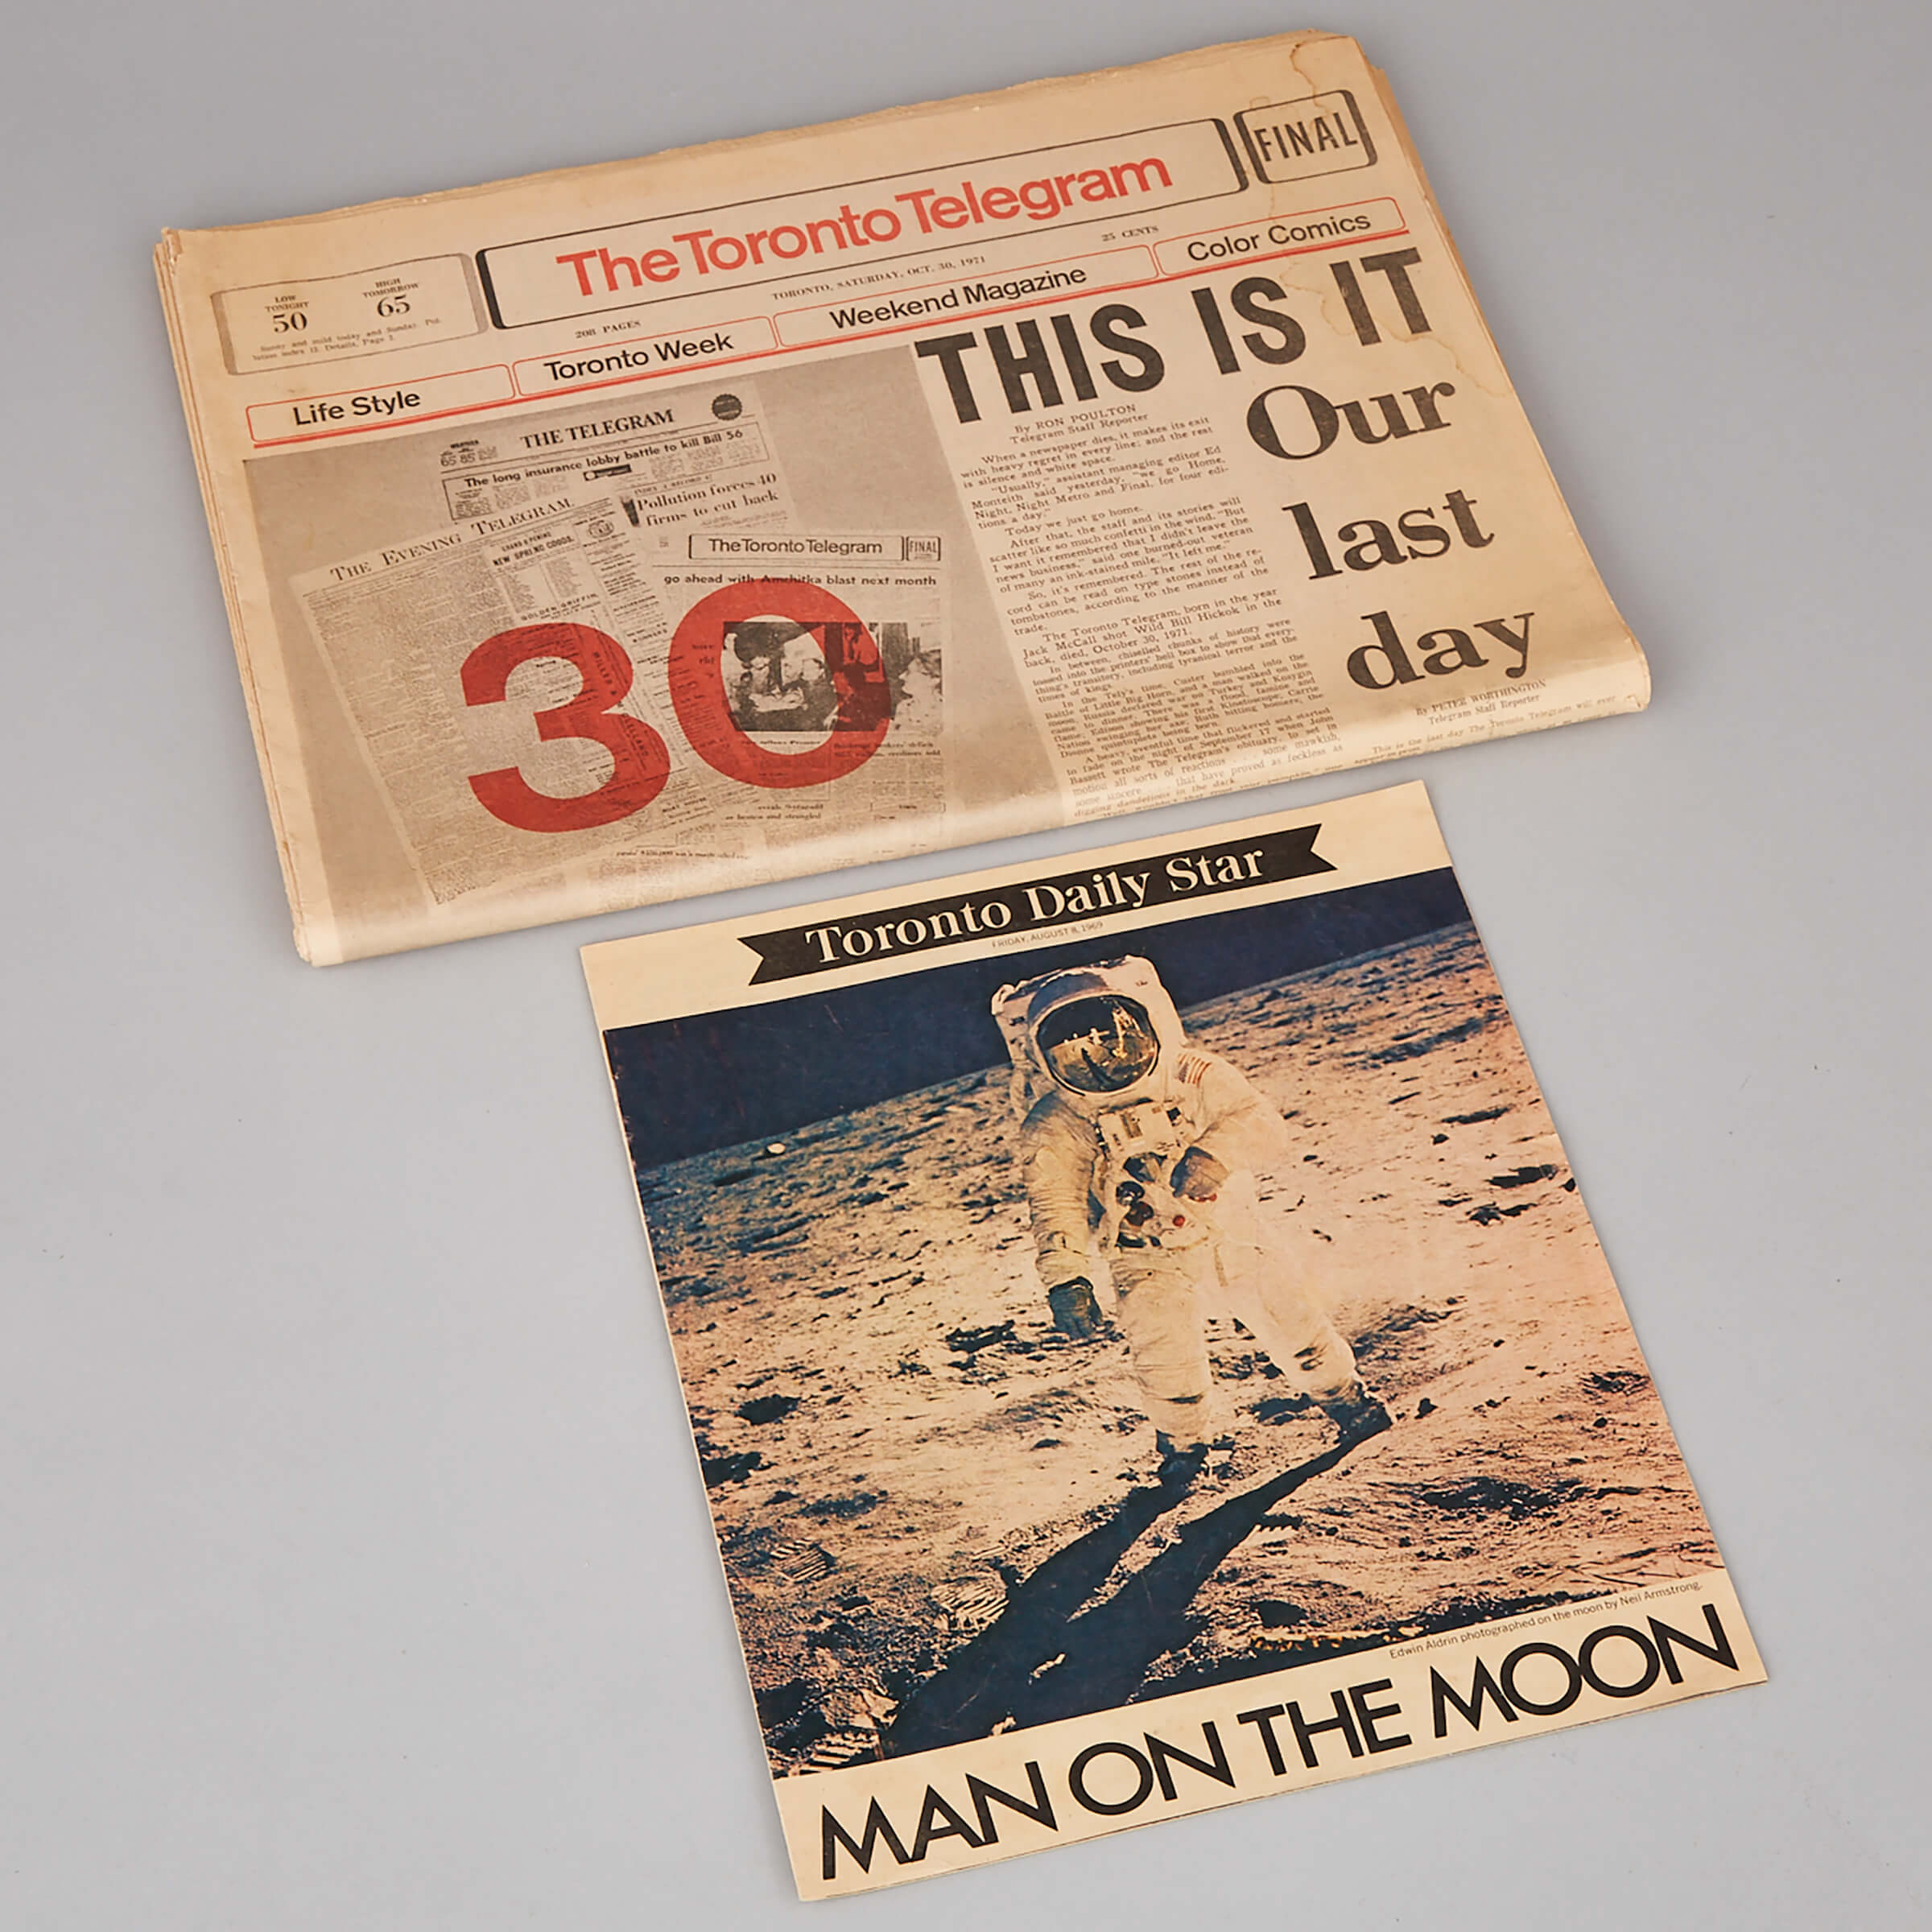 Last Issue of The Toronto Telegram, Oct. 30, 1971 with Toronto Daily Star Supplement, ‘Man on the Moon’, August 8, 1969